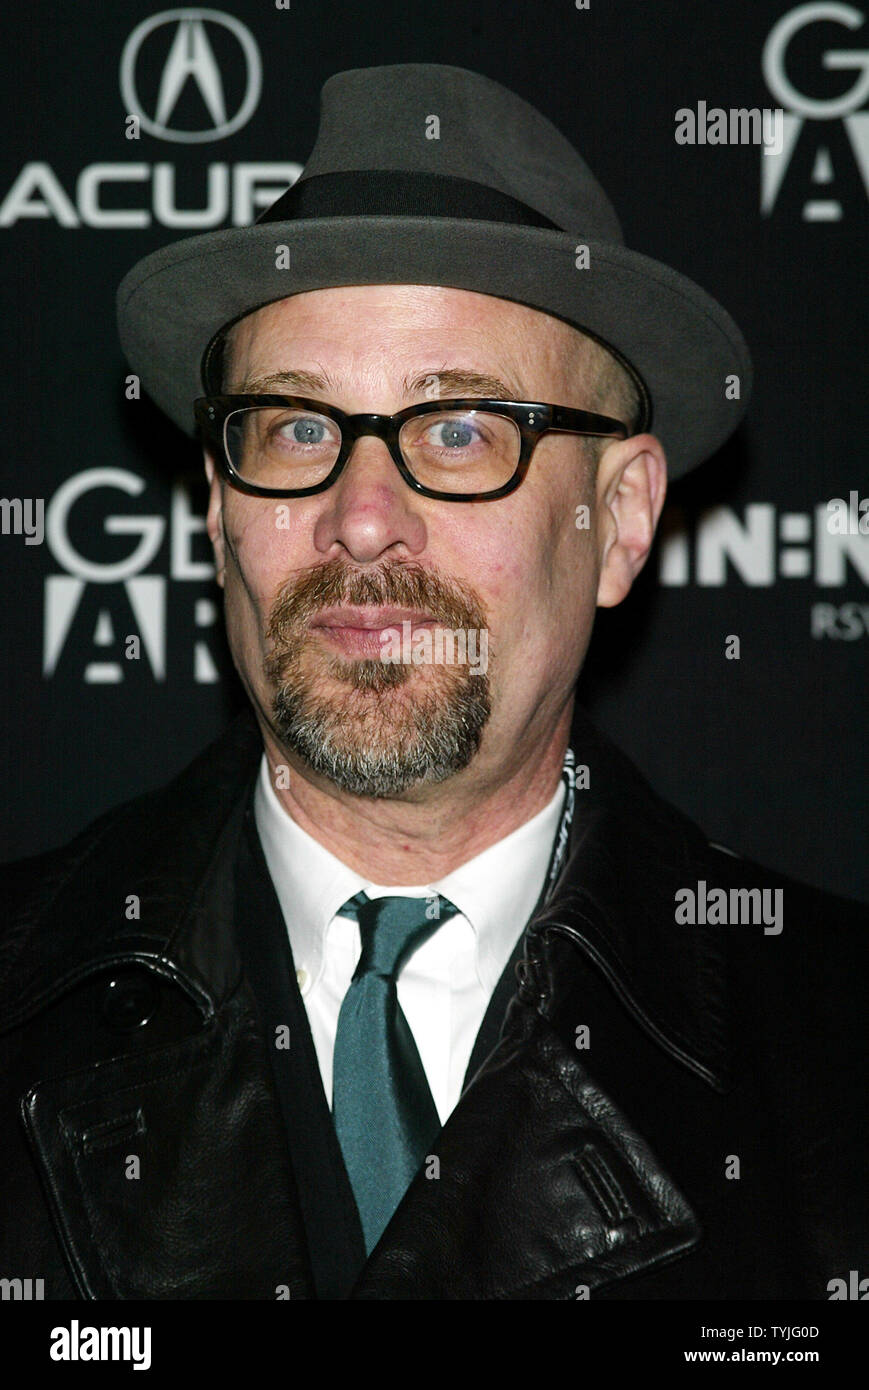 Terry Kinney arrives at the Gen Art Film Festival Premiere of 'Diminished Capacity' at the Ziegfeld Theater in New York on April 2, 2008.   (UPI Photo/Laura Cavanaugh) Stock Photo